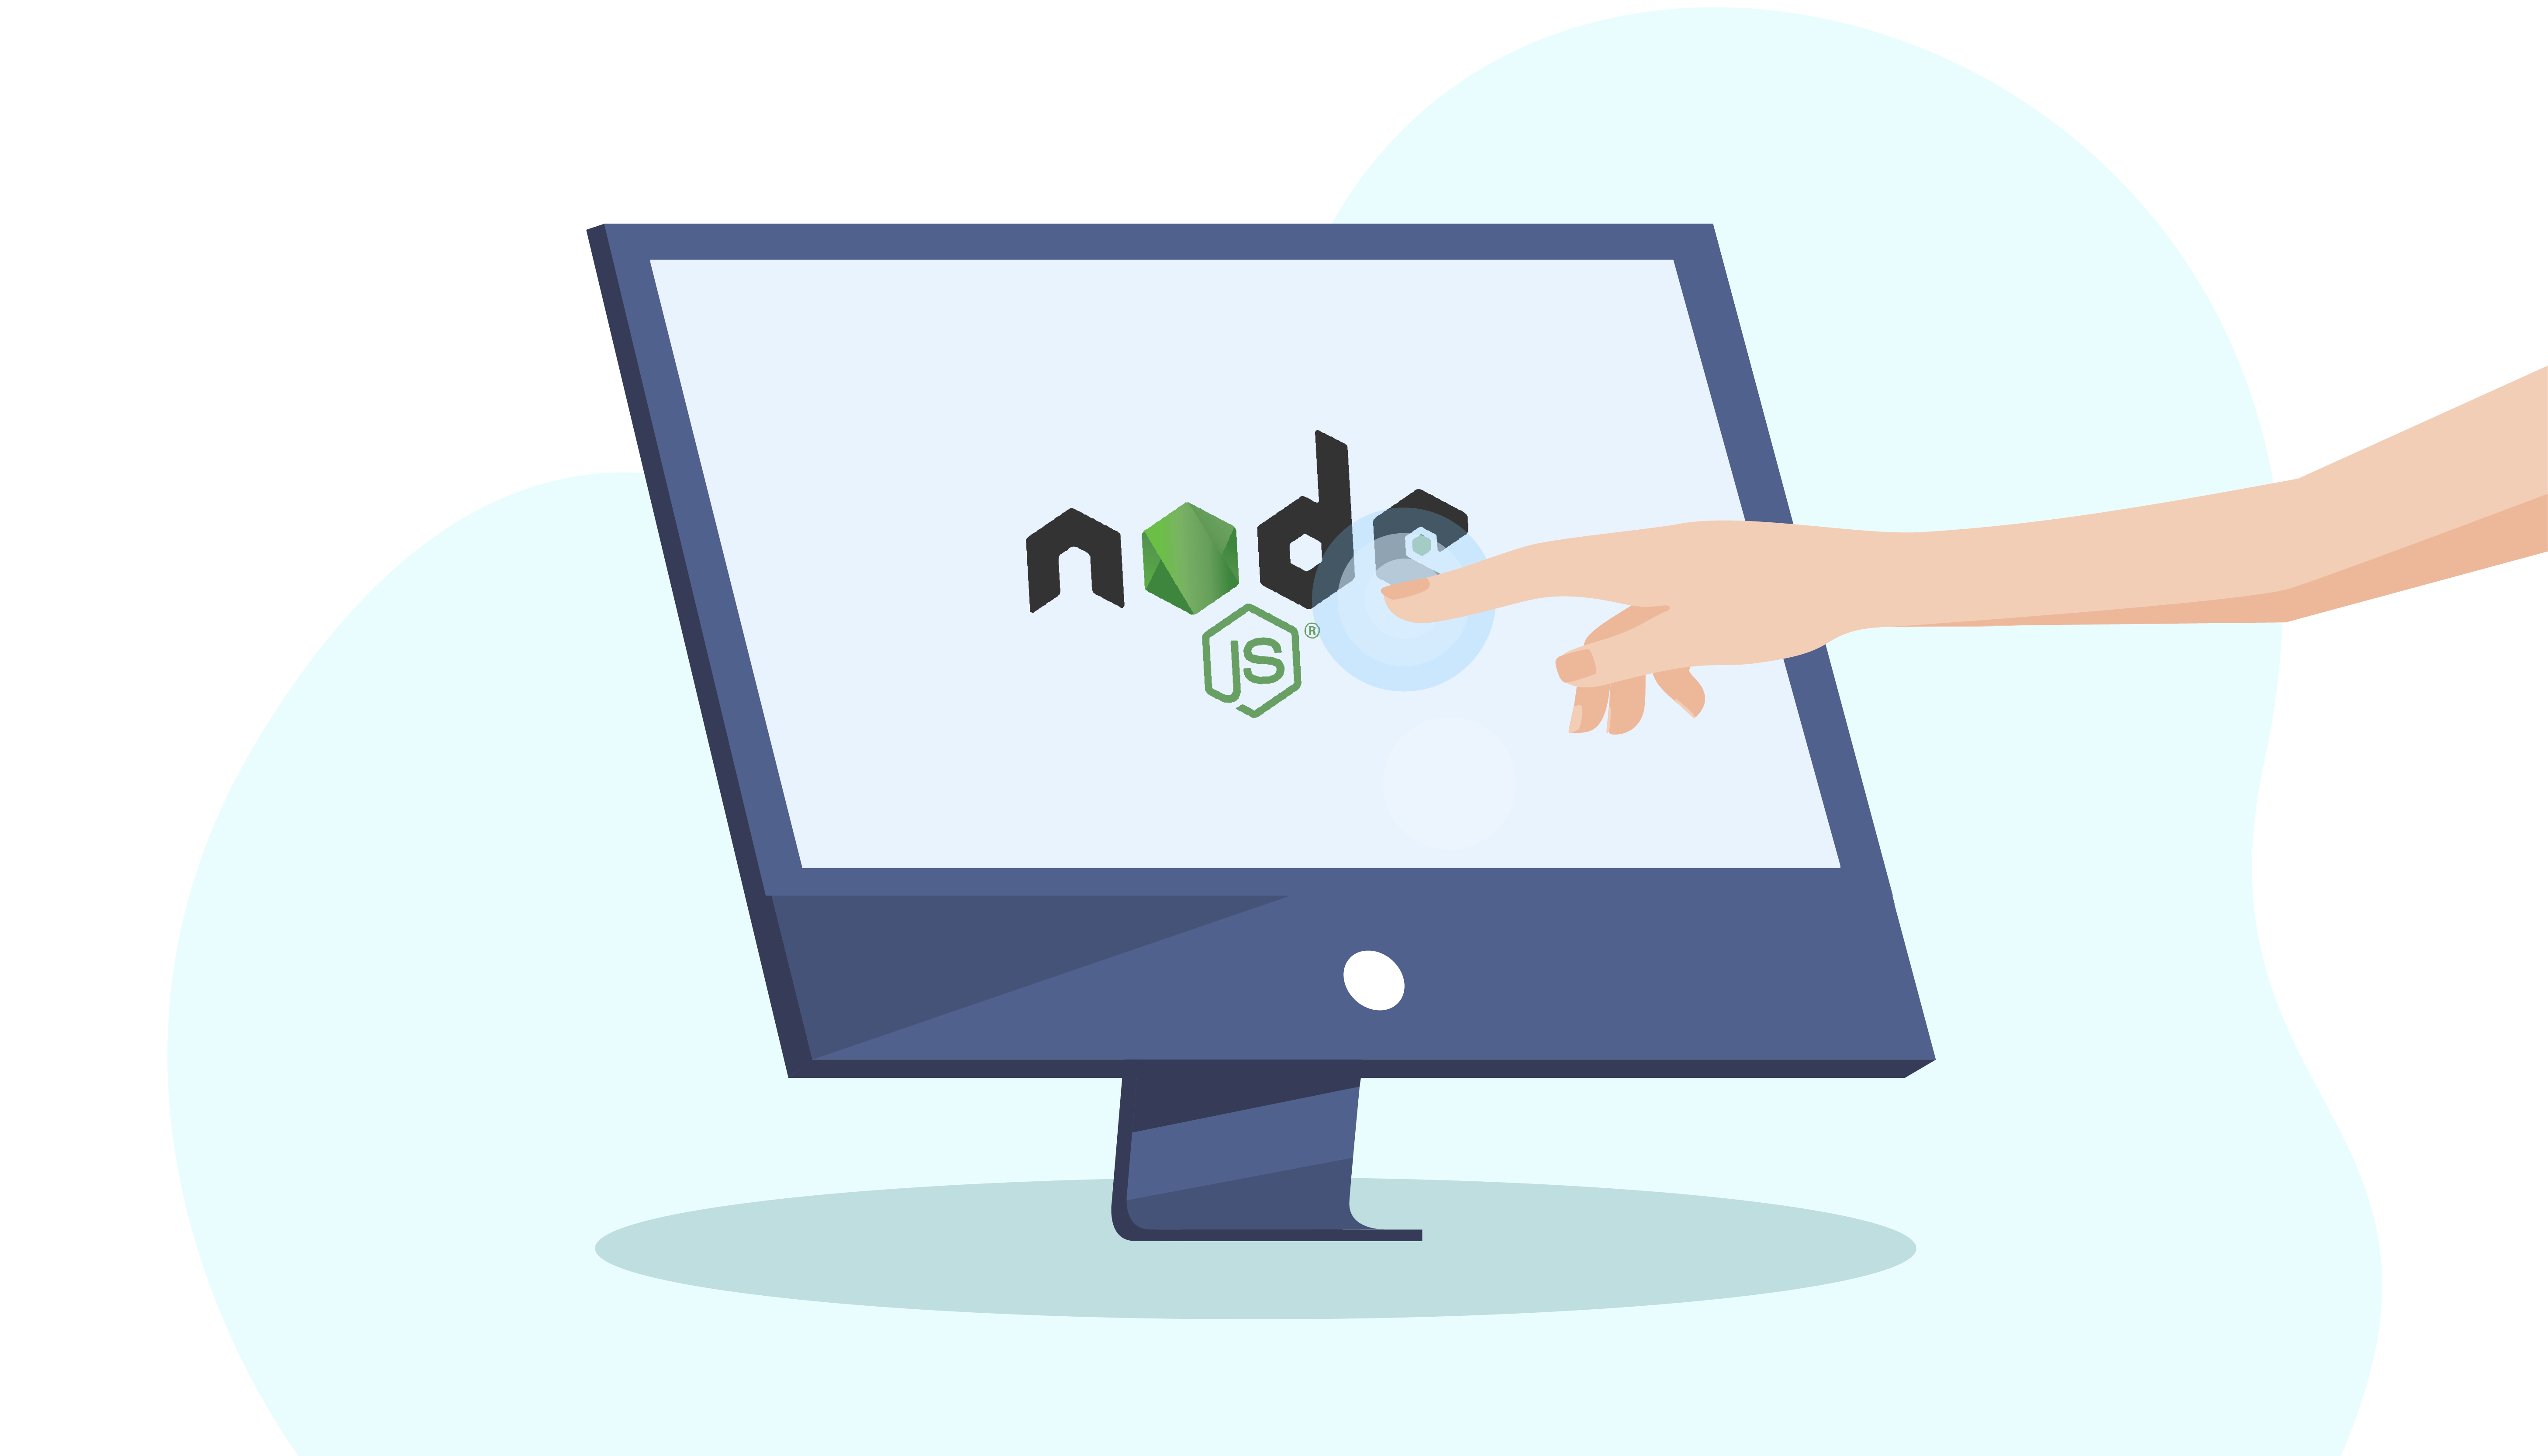 What Should You Know About the Future of Node.js?